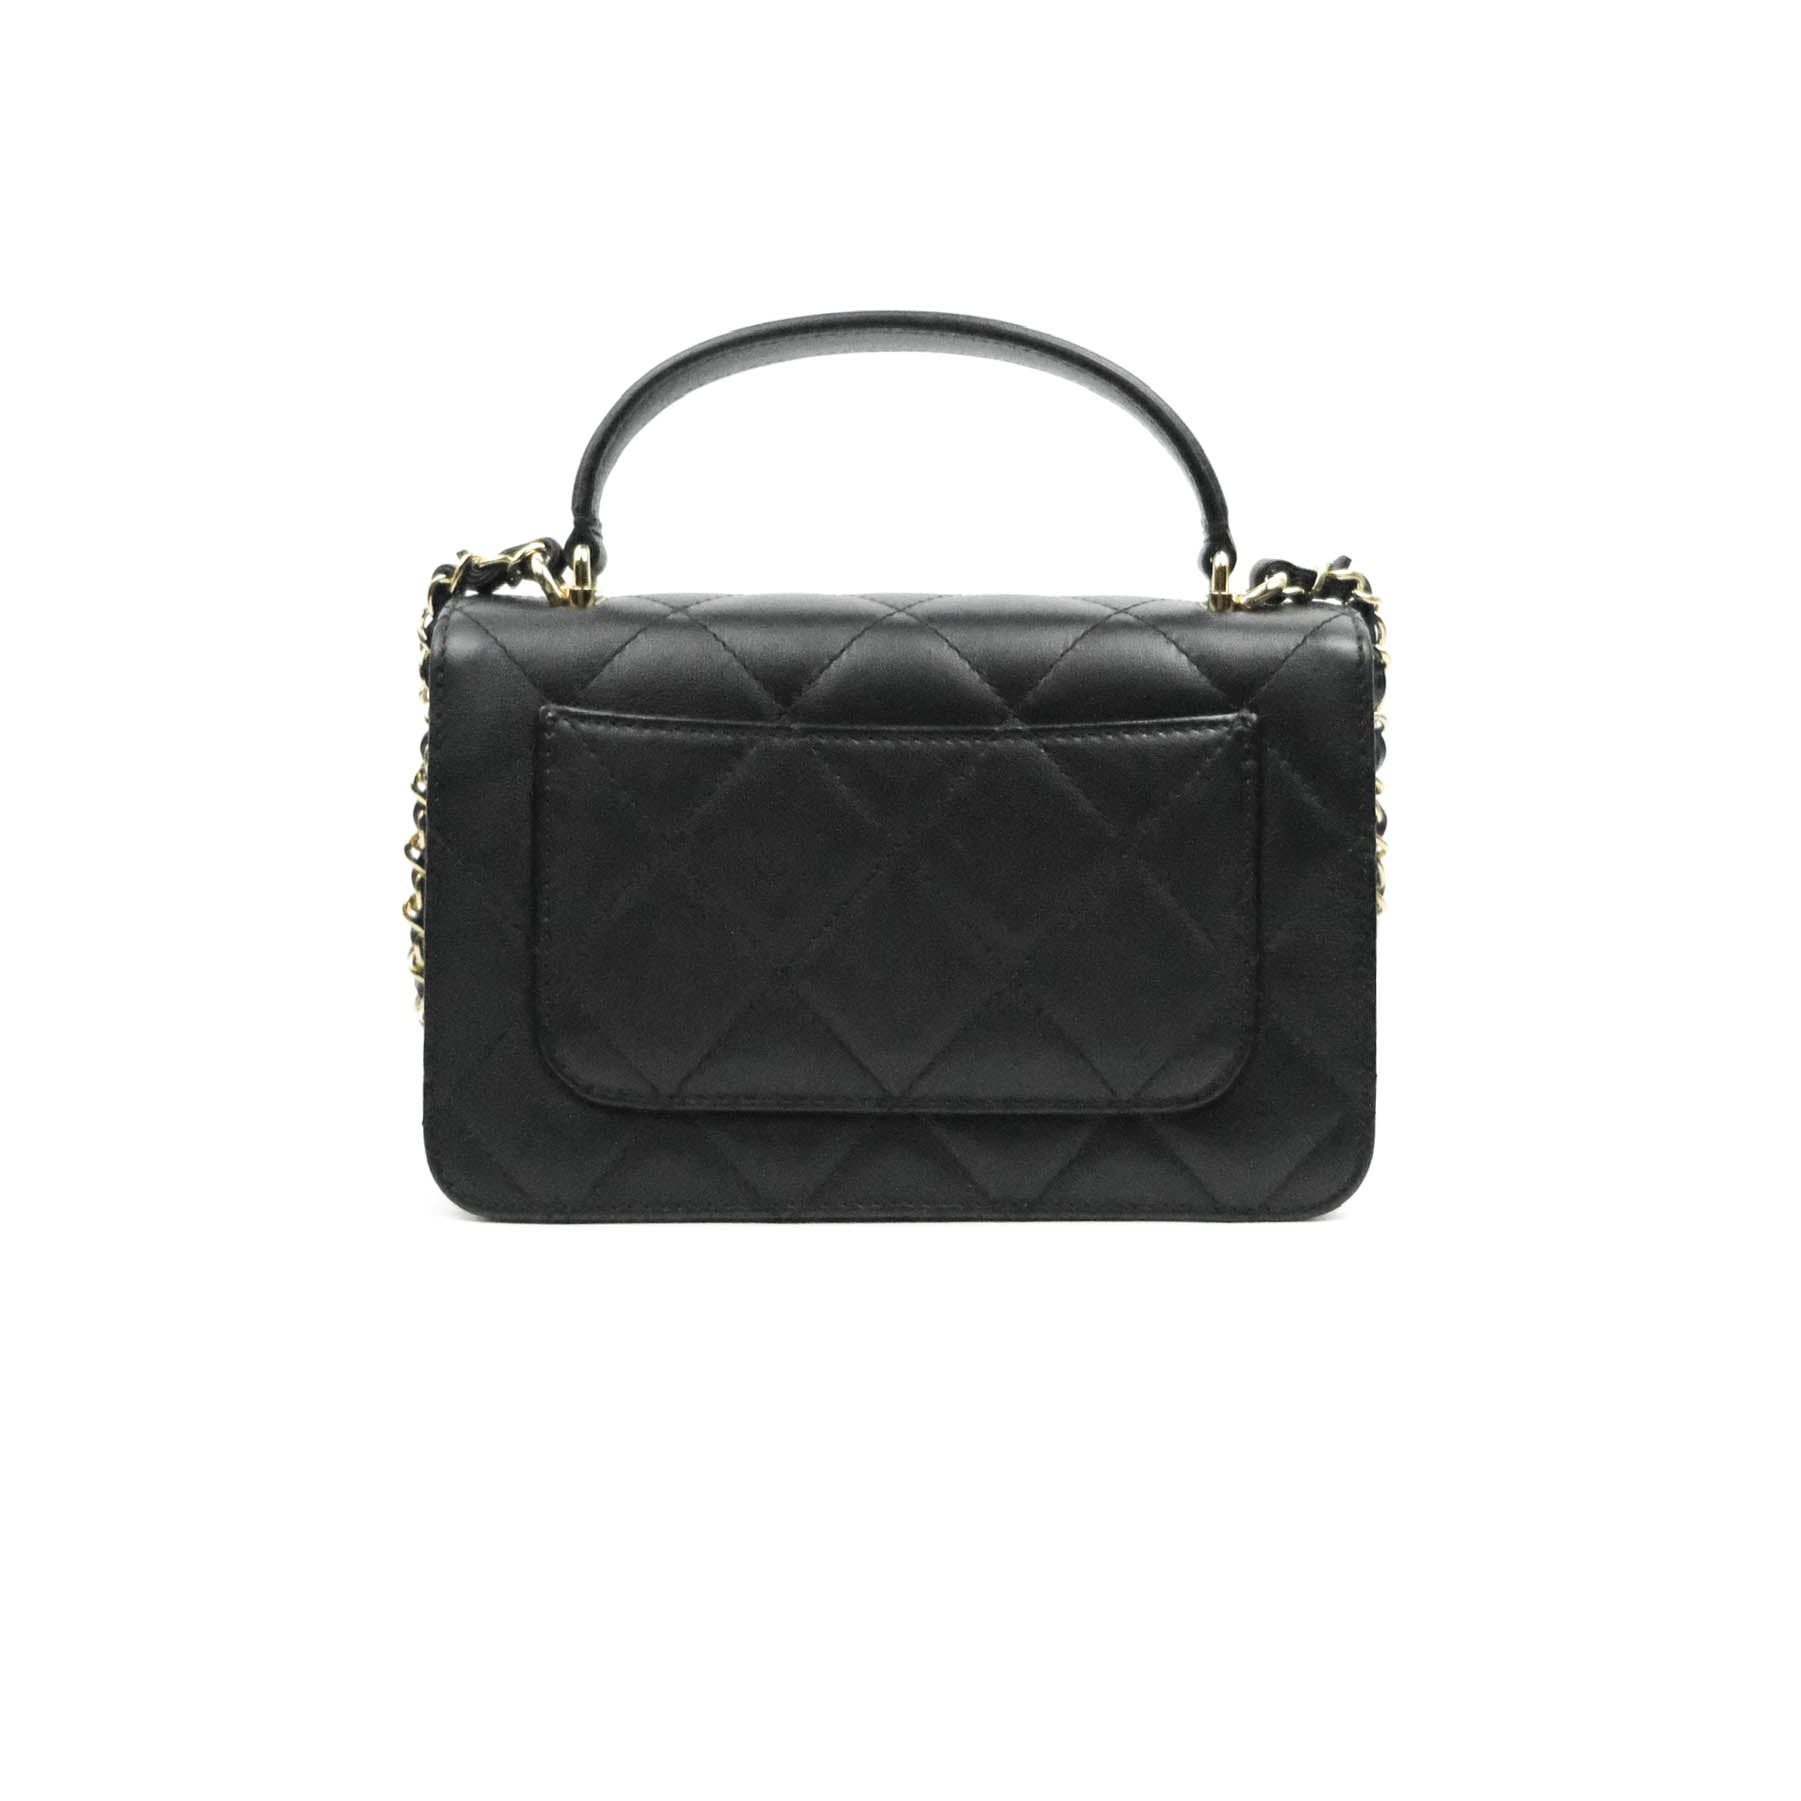 coco chanel purses and handbags on clearance